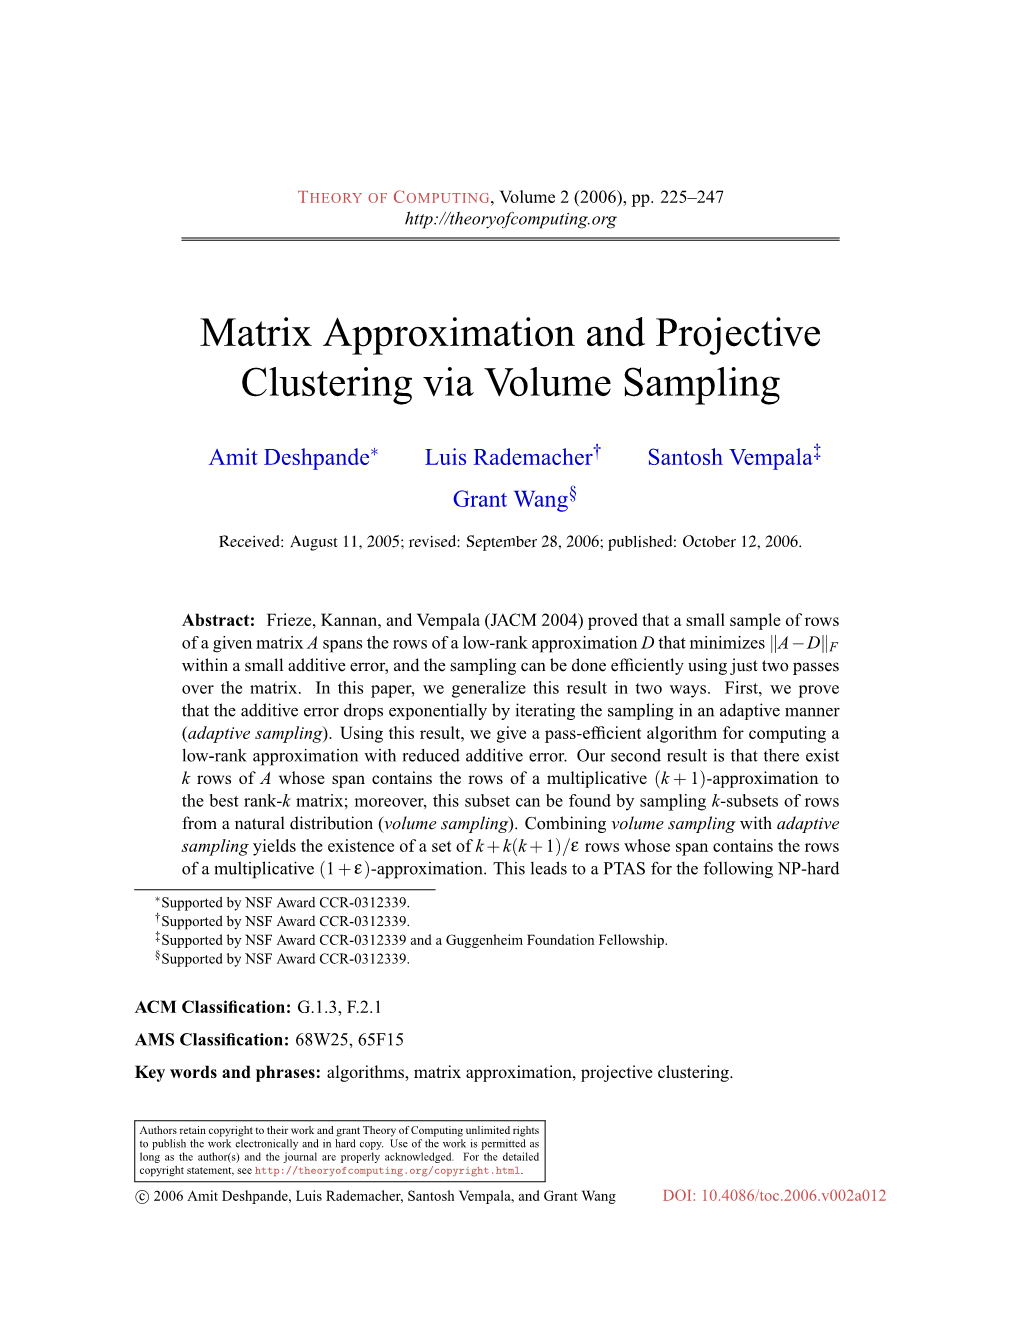 Matrix Approximation and Projective Clustering Via Volume Sampling